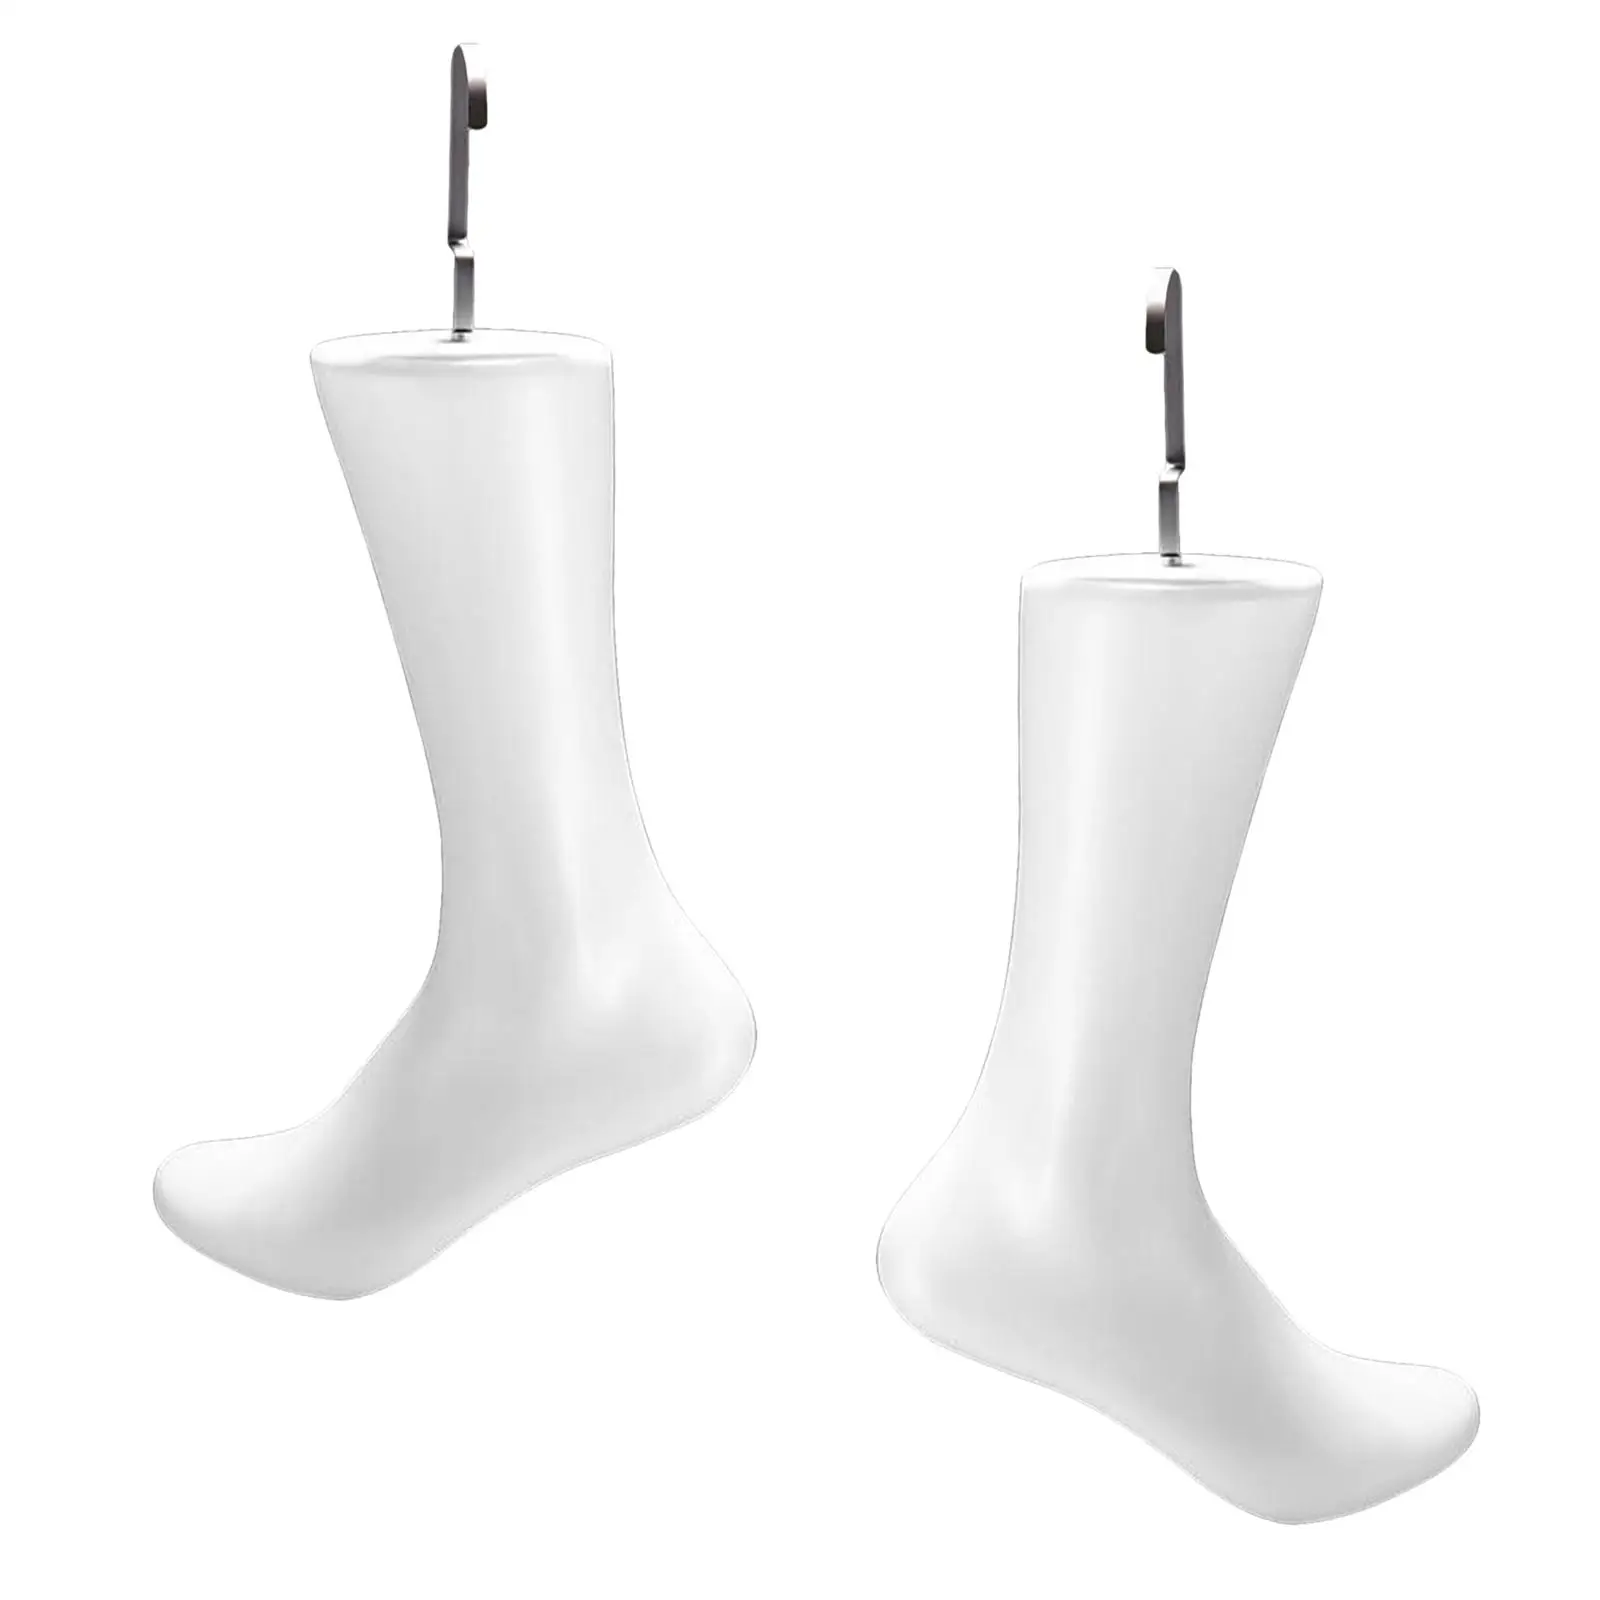 2x Foot Standing  Model with Hook White Shoe Sock Display 32cm 